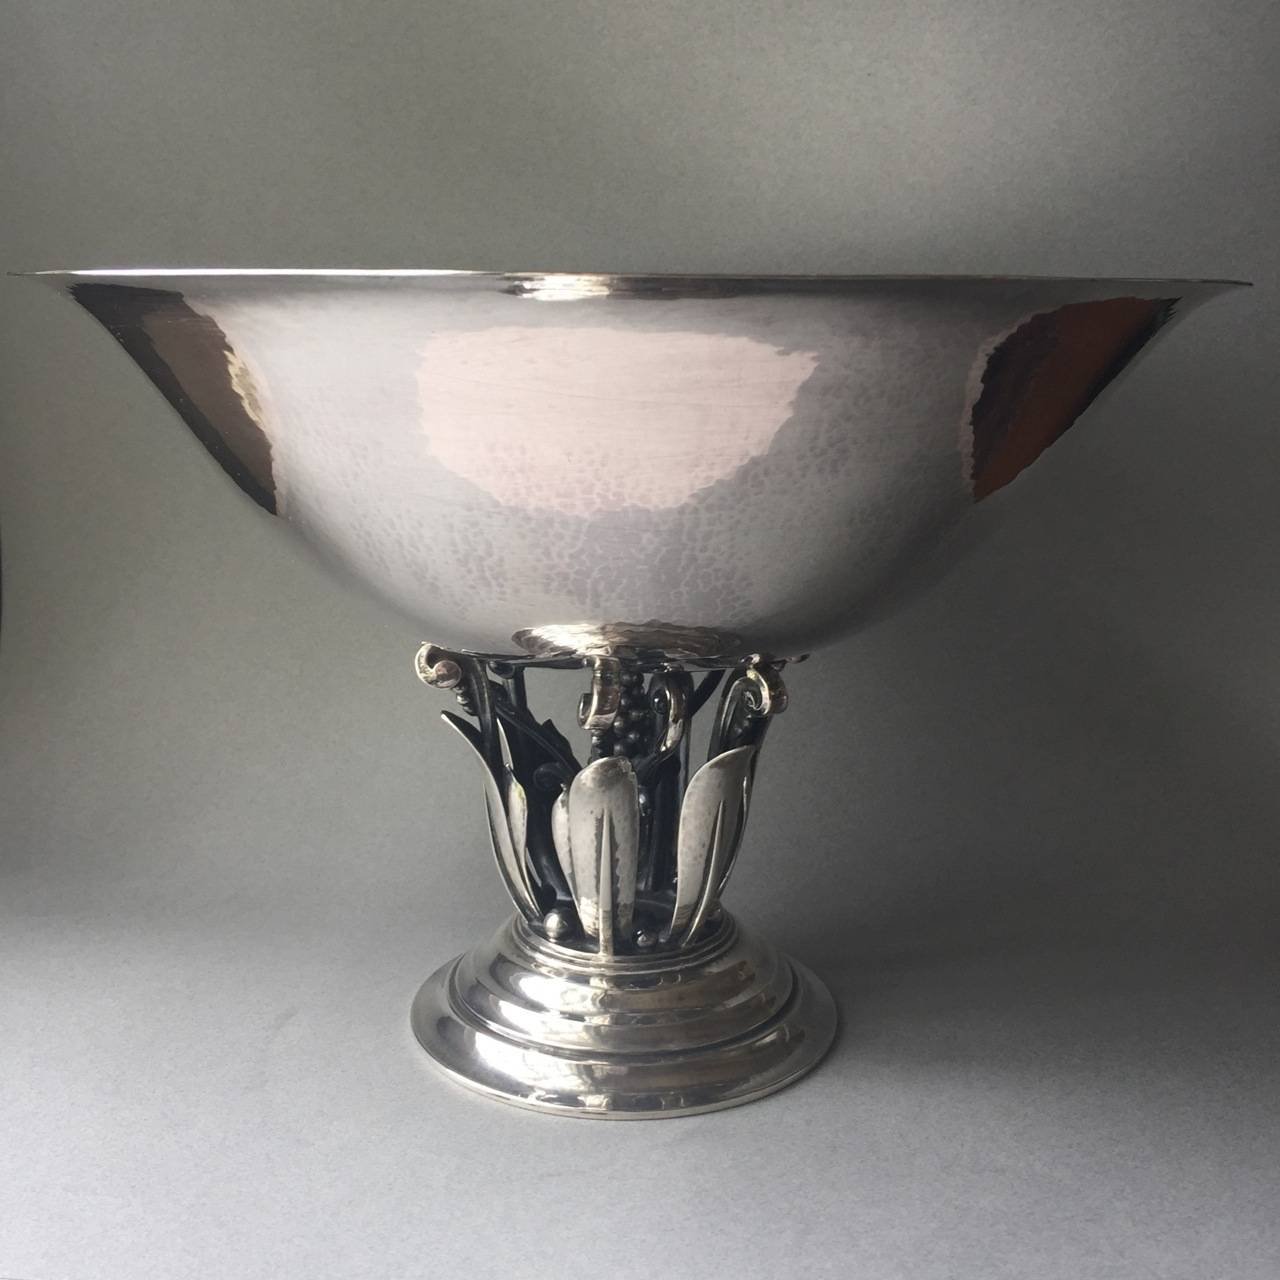 Georg Jensen Sterling Silver Centerpiece Bowl No. 196 by Johan Rohde.

Large silver bowl mounted upon open-worked stem with stylized foliage and clustered cone of berries. Round stepped base. Hand-hammered and chased details.

Early Georg Jensen